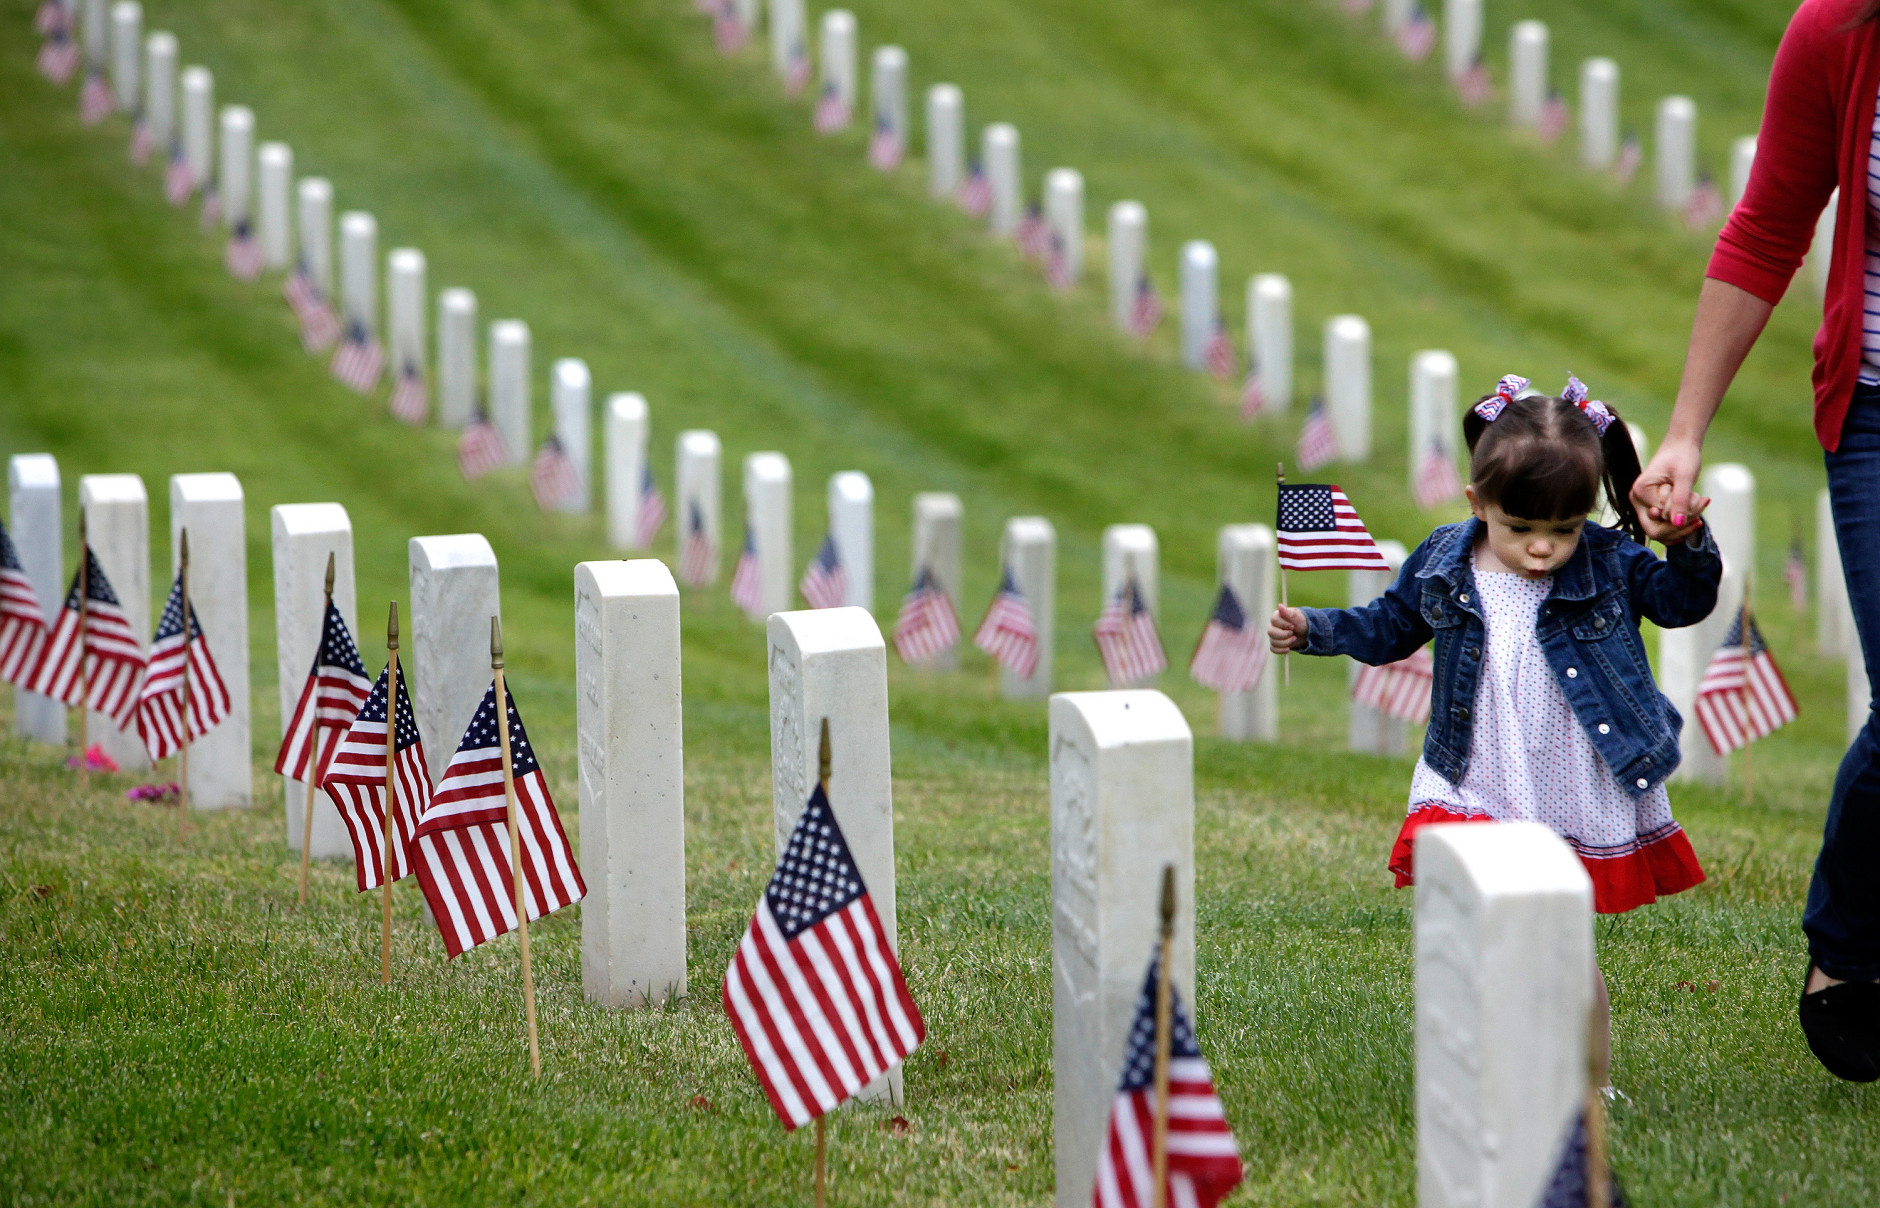 Madelyn Andrews, of Woodland Hills, Calif., walks past military graves while placing flags at headstones in remembrance of Memorial Day, Monday, May 25, 2015, at The Los Angeles National Cemetery in Los Angeles. (AP Photo/Richard Vogel)